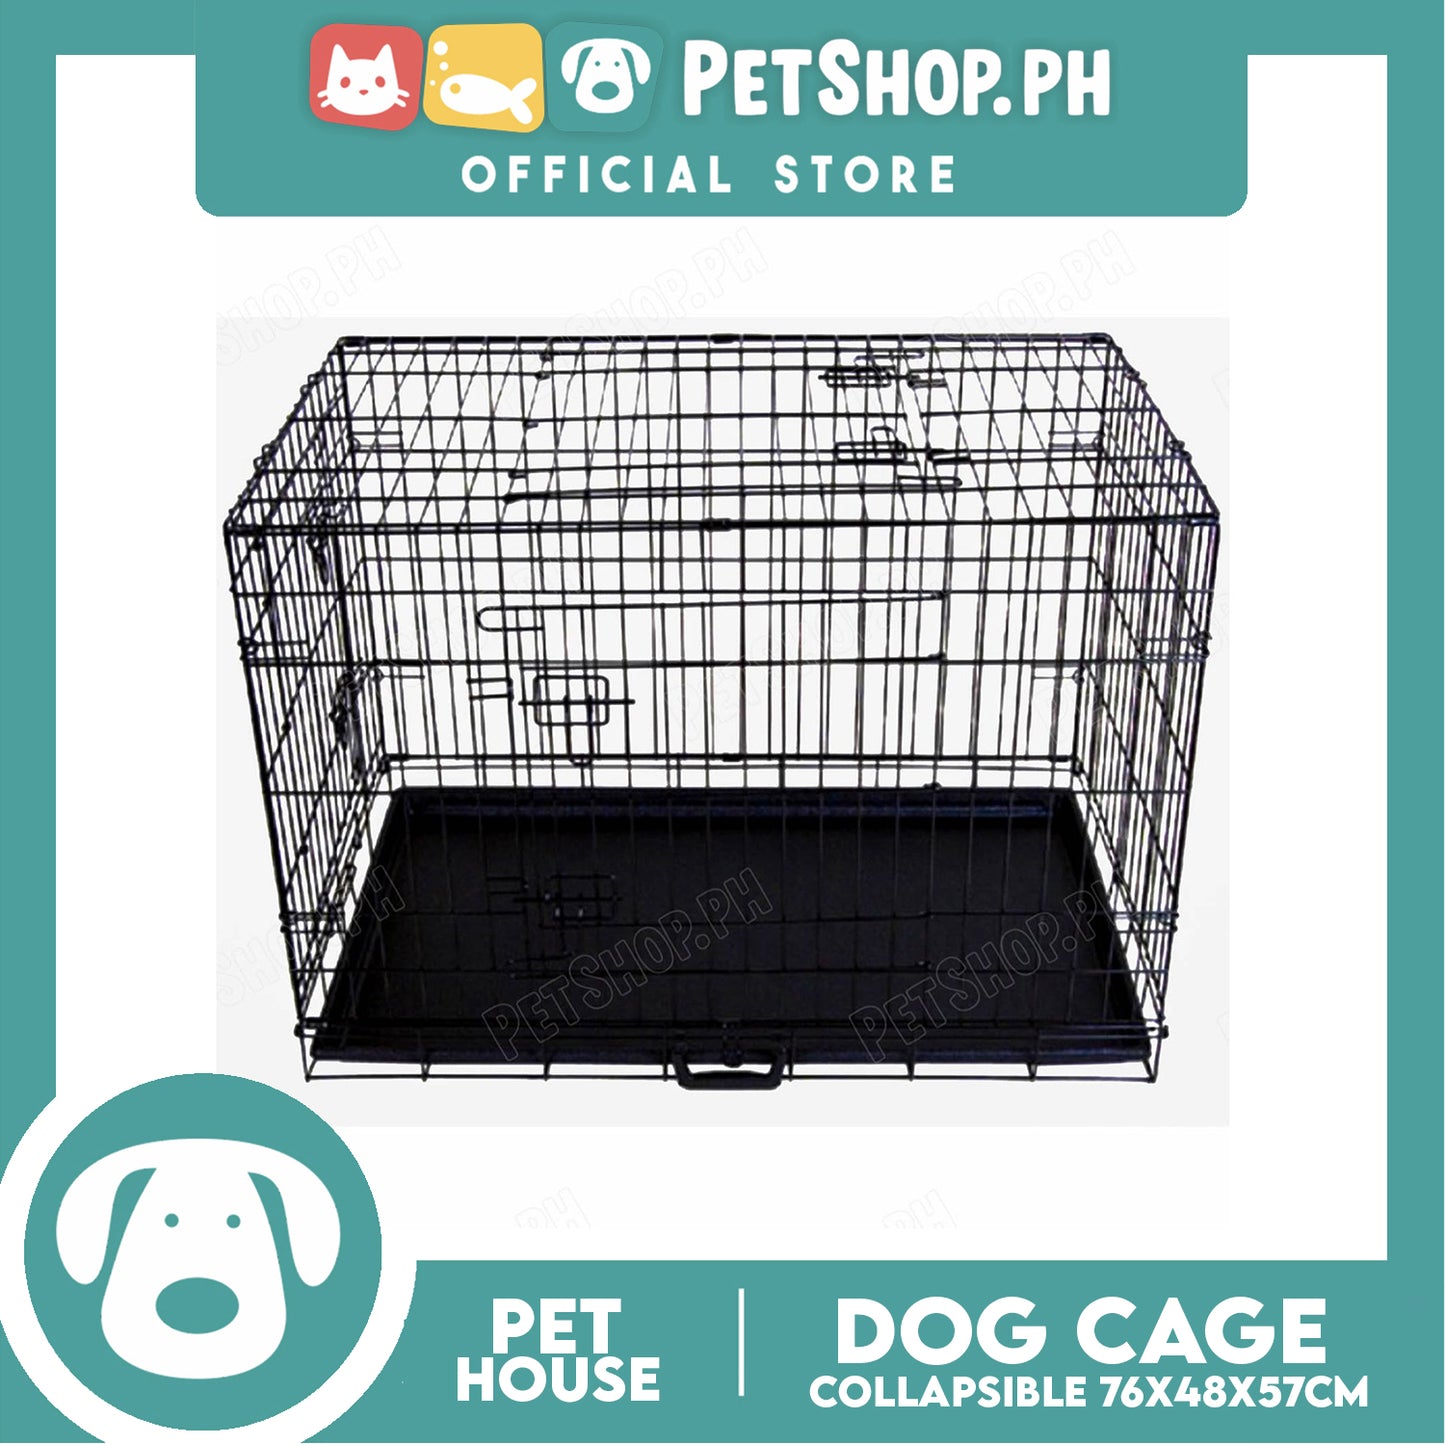 Collapsible Dog Cage 76x48x57